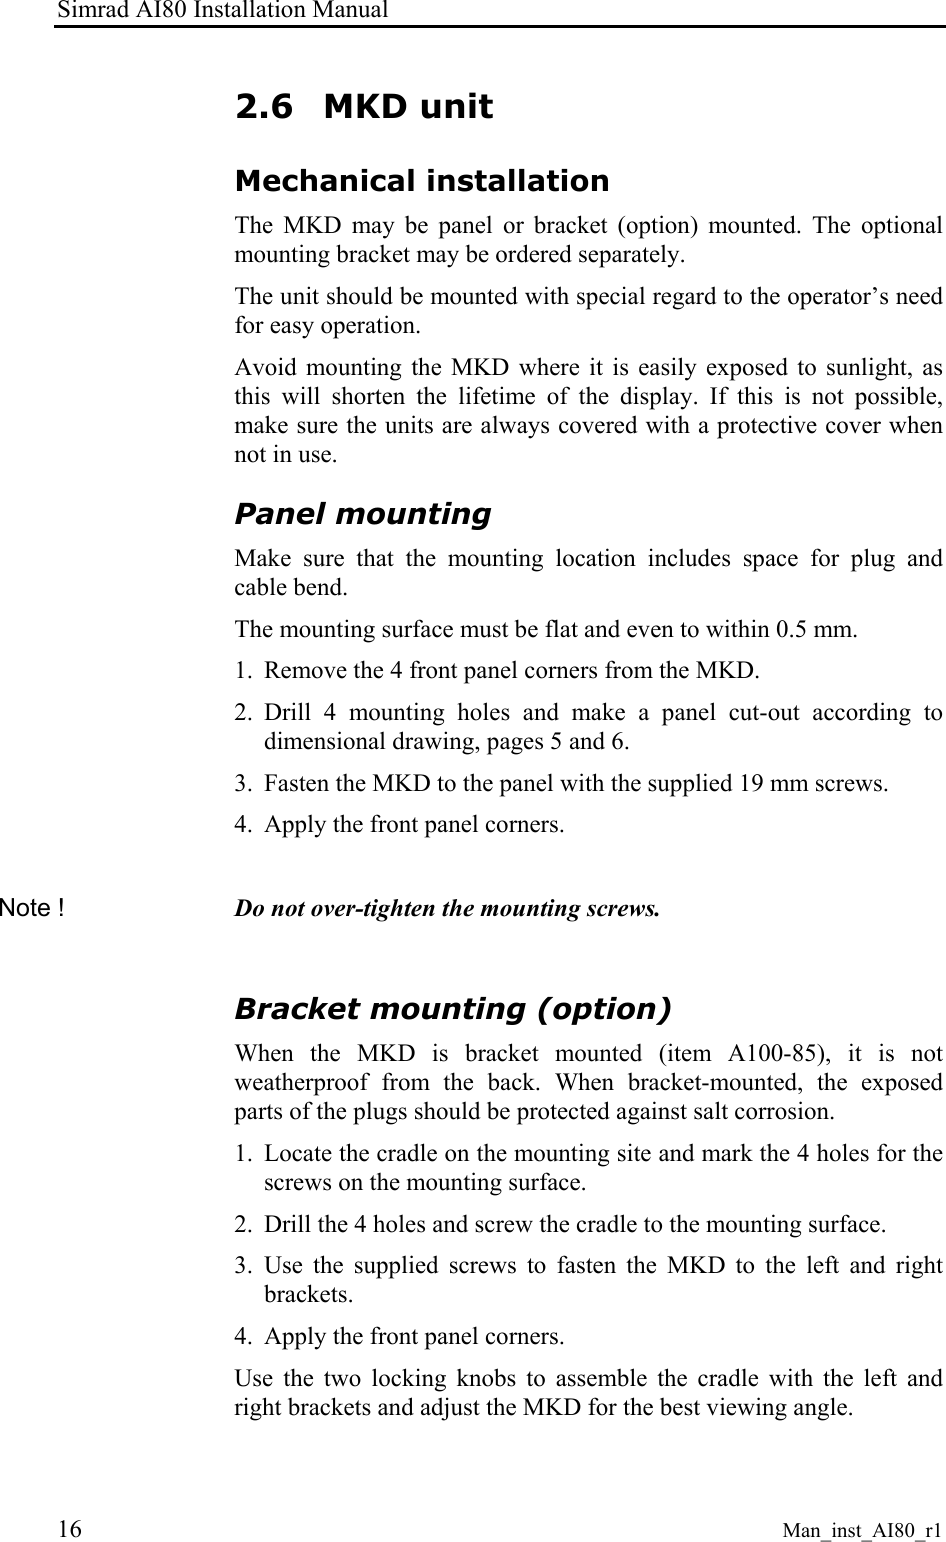 Simrad AI80 Installation Manual  16 Man_inst_AI80_r1 2.6 MKD unit Mechanical installation The MKD may be panel or bracket (option) mounted. The optional mounting bracket may be ordered separately. The unit should be mounted with special regard to the operator’s need for easy operation. Avoid mounting the MKD where it is easily exposed to sunlight, as this will shorten the lifetime of the display. If this is not possible, make sure the units are always covered with a protective cover when not in use. Panel mounting Make sure that the mounting location includes space for plug and cable bend. The mounting surface must be flat and even to within 0.5 mm. 1. Remove the 4 front panel corners from the MKD. 2. Drill 4 mounting holes and make a panel cut-out according to dimensional drawing, pages 5 and 6. 3. Fasten the MKD to the panel with the supplied 19 mm screws. 4. Apply the front panel corners.  Note !  Do not over-tighten the mounting screws.  Bracket mounting (option) When the MKD is bracket mounted (item A100-85), it is not weatherproof from the back. When bracket-mounted, the exposed parts of the plugs should be protected against salt corrosion. 1. Locate the cradle on the mounting site and mark the 4 holes for the screws on the mounting surface. 2. Drill the 4 holes and screw the cradle to the mounting surface. 3. Use the supplied screws to fasten the MKD to the left and right brackets. 4. Apply the front panel corners. Use the two locking knobs to assemble the cradle with the left and right brackets and adjust the MKD for the best viewing angle. 